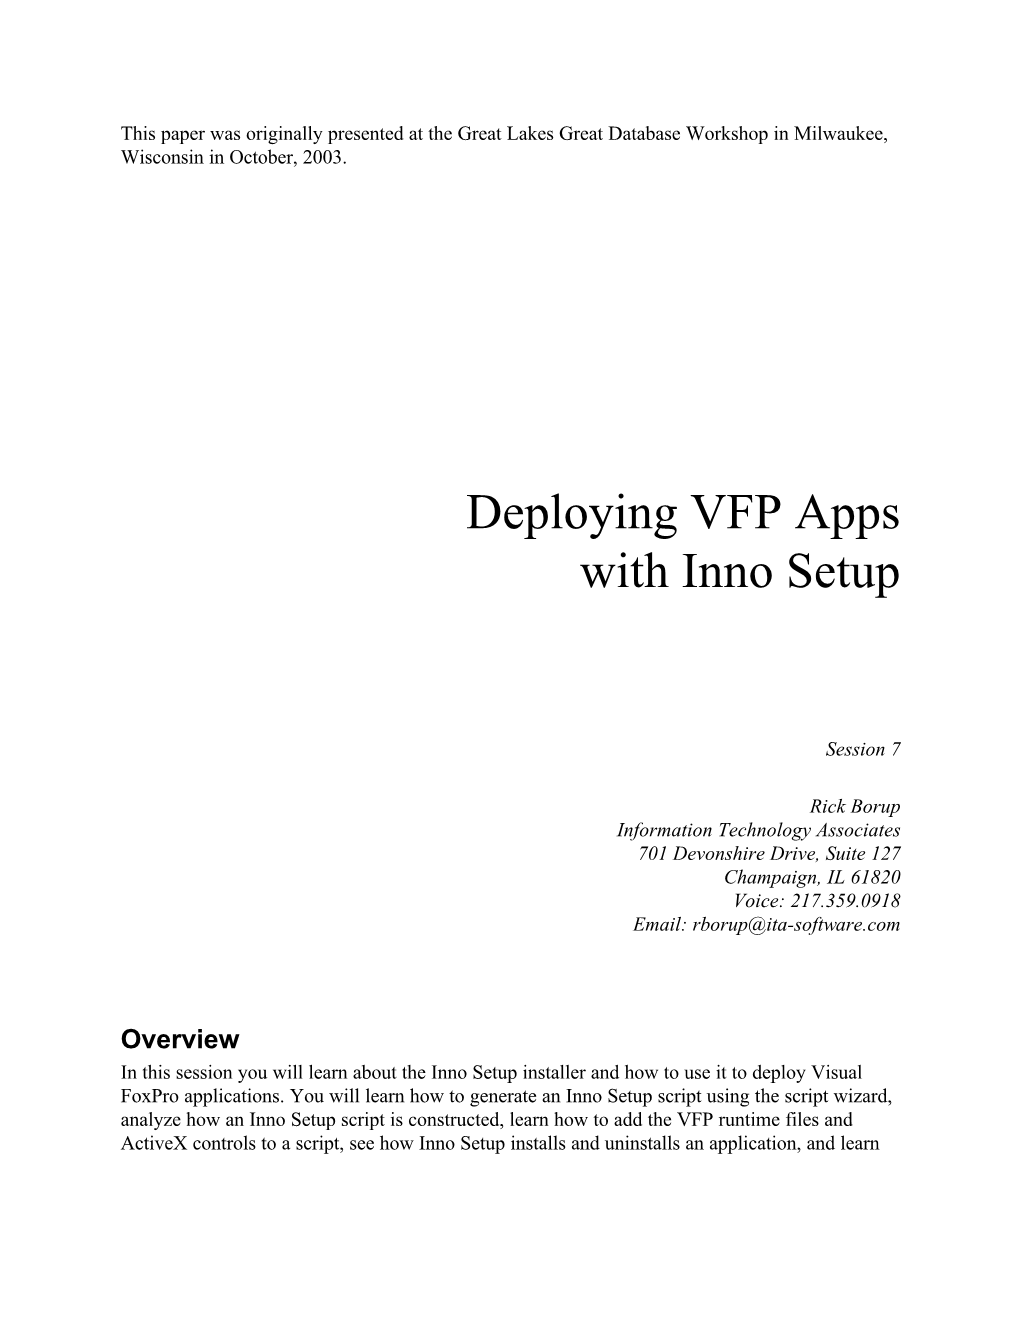 Deploying VFP Apps with Inno Setup